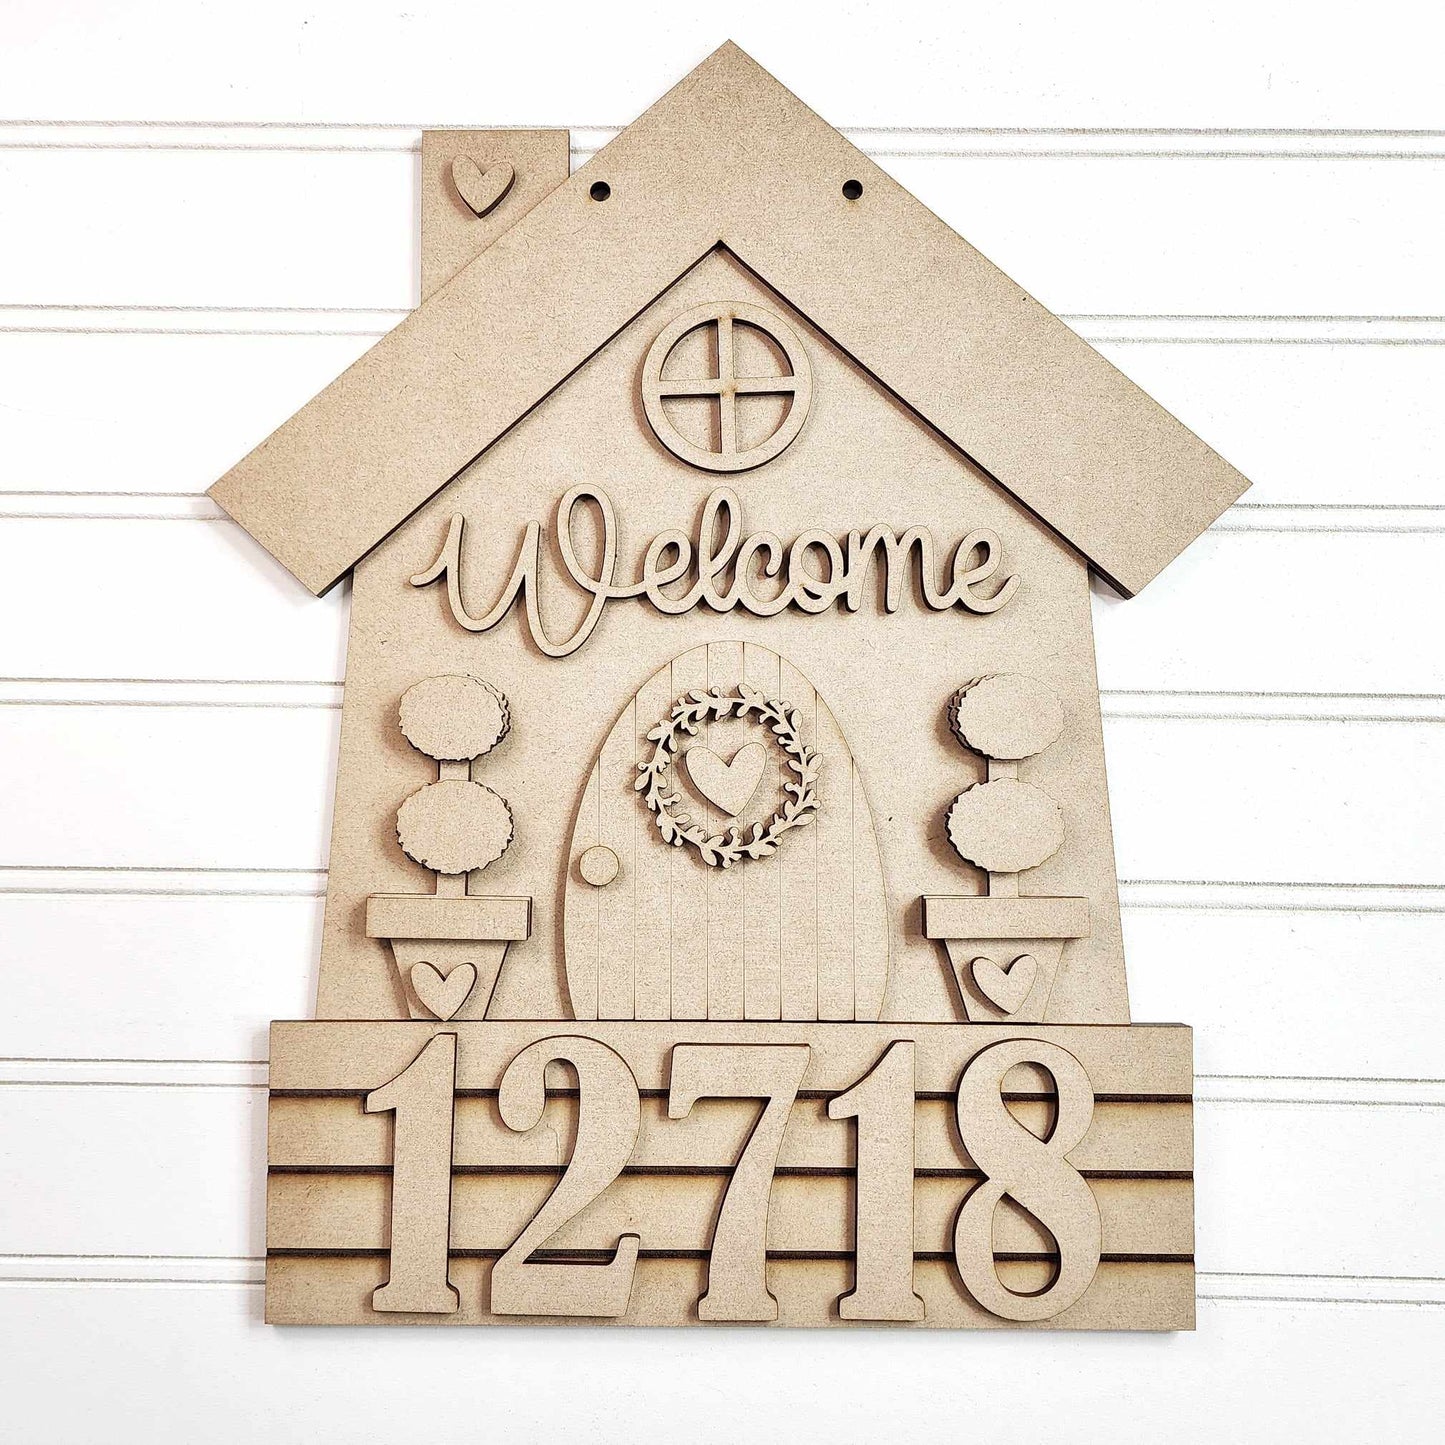 Welcome Home Truck Insert cutouts - unpainted wooden cutouts, ready for you to paint